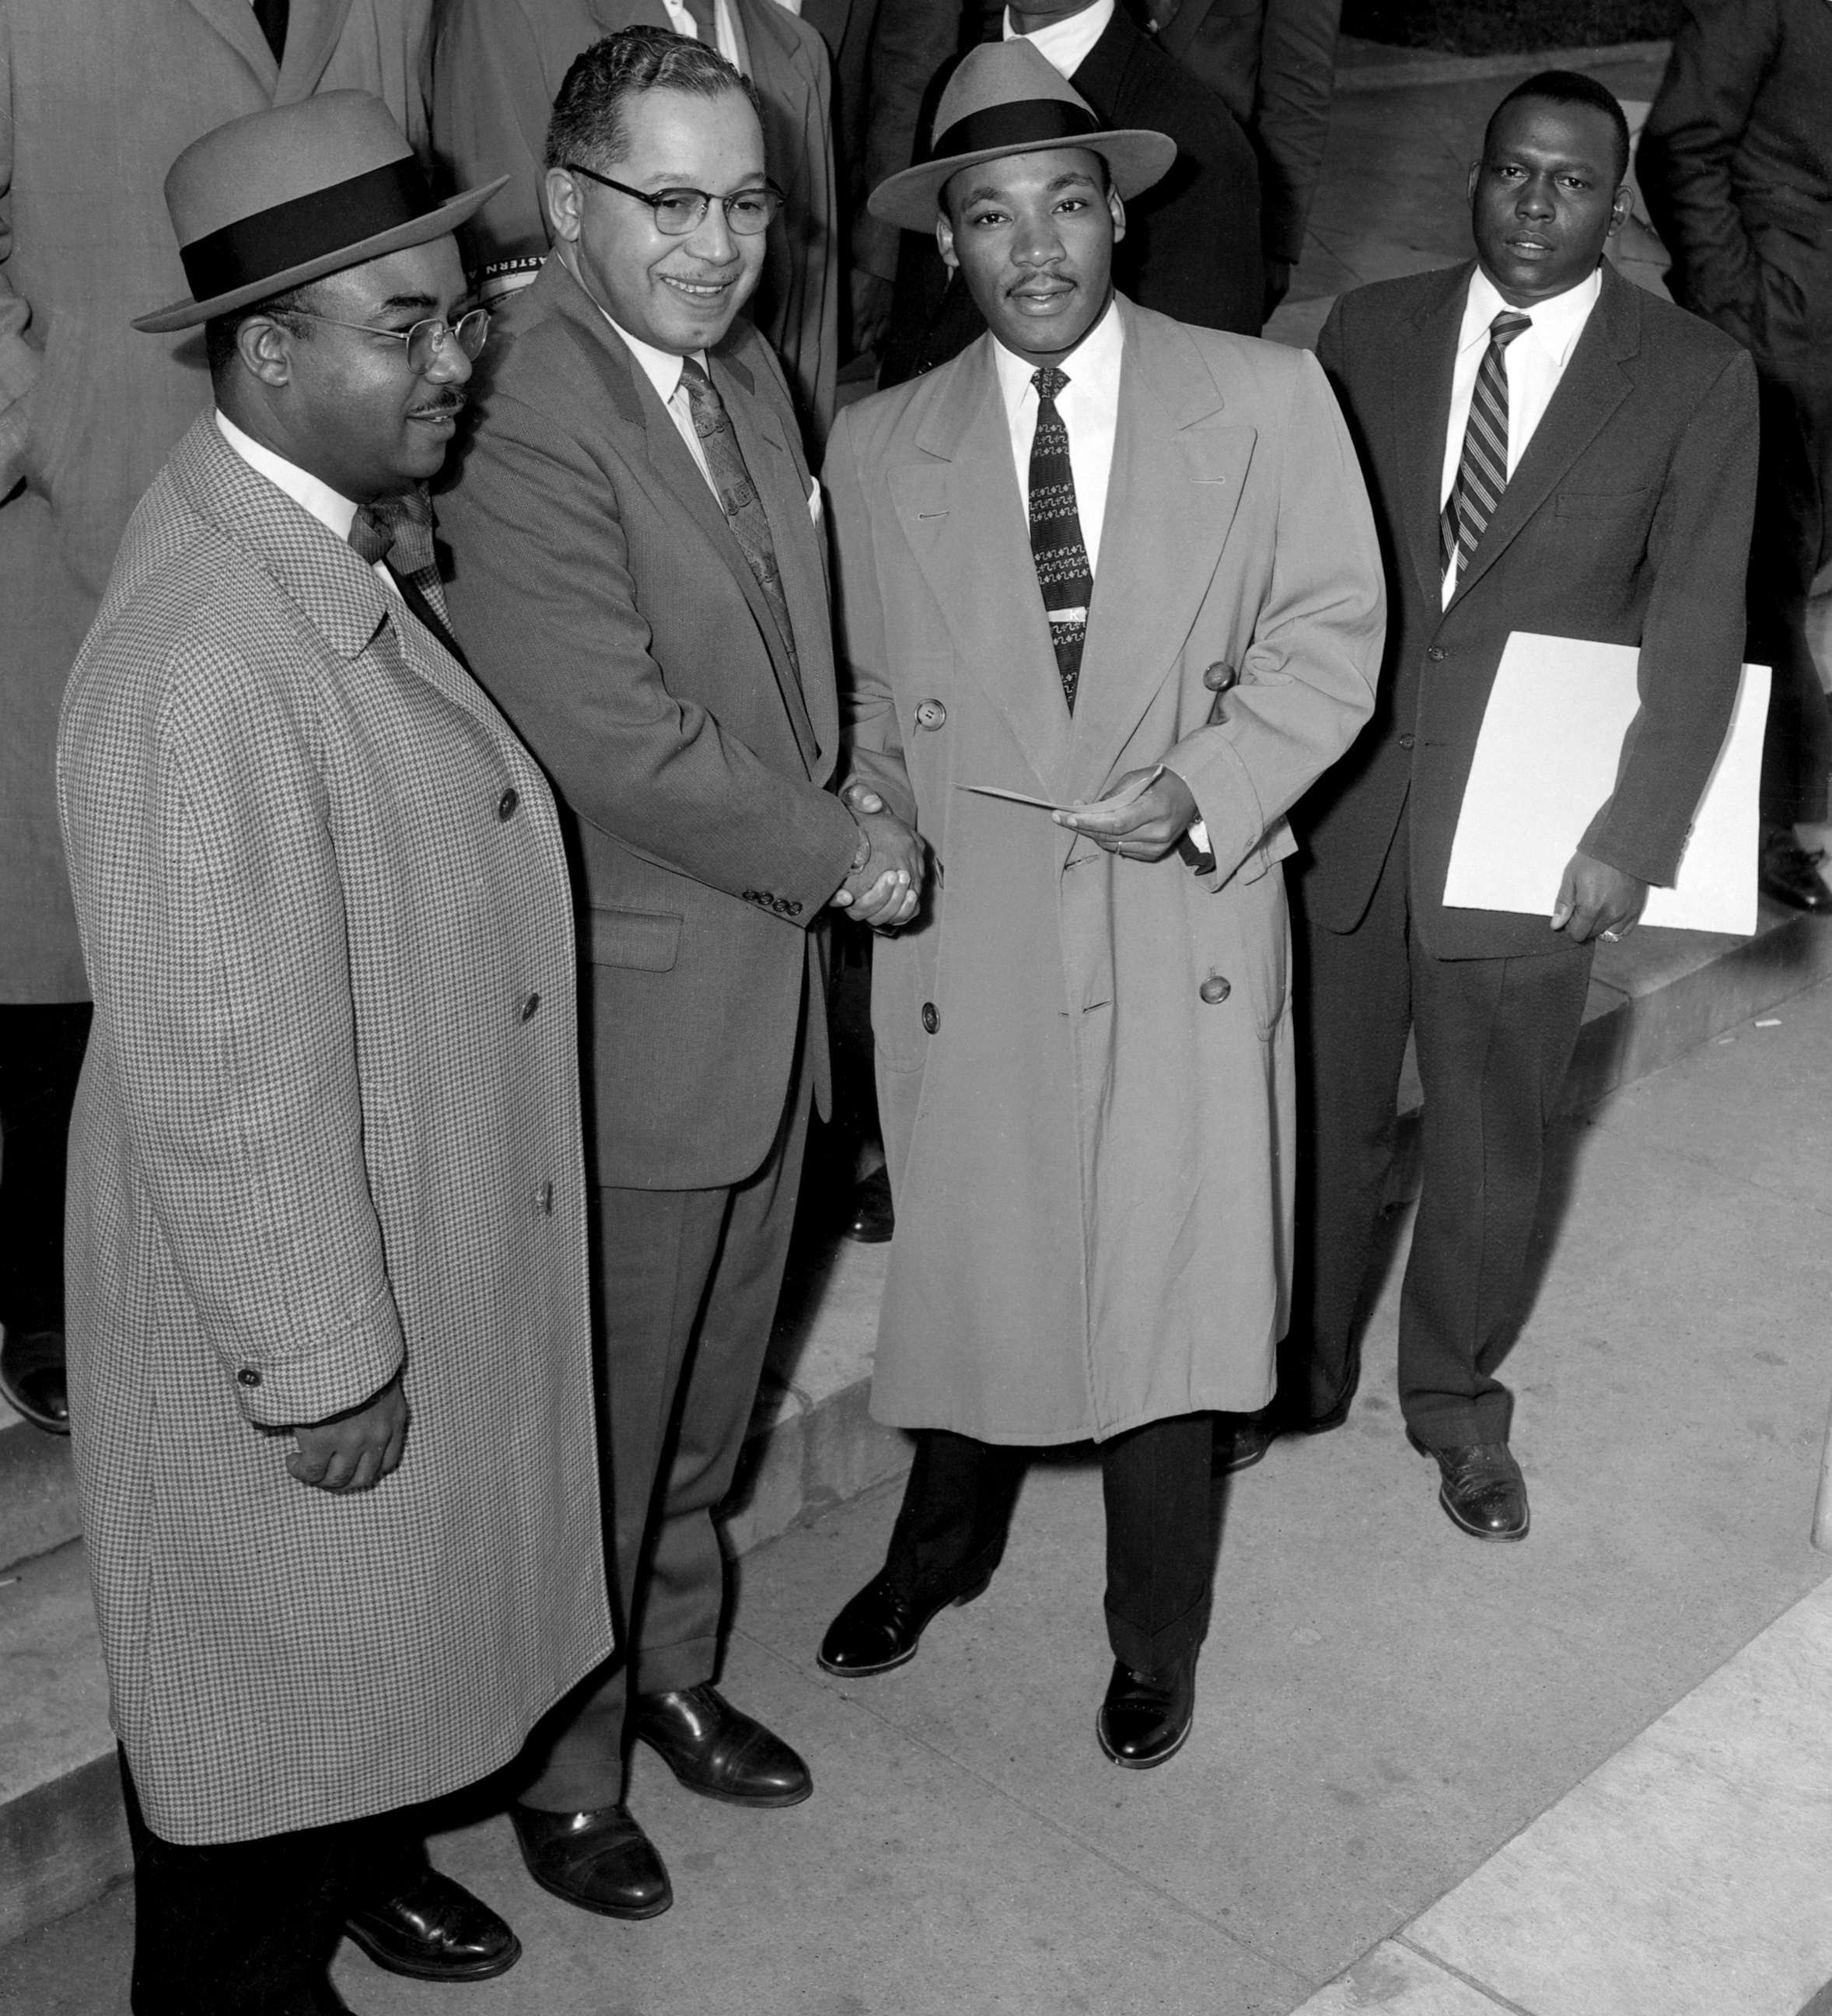 PHOTO: In this March 20, 1956 file photo James E. Huger, Gen. Secretary of Alphi Phi Alpha fraternity, presents a check for $1,000 to Rev. Martin Luther King as they arrived for the second day in court.